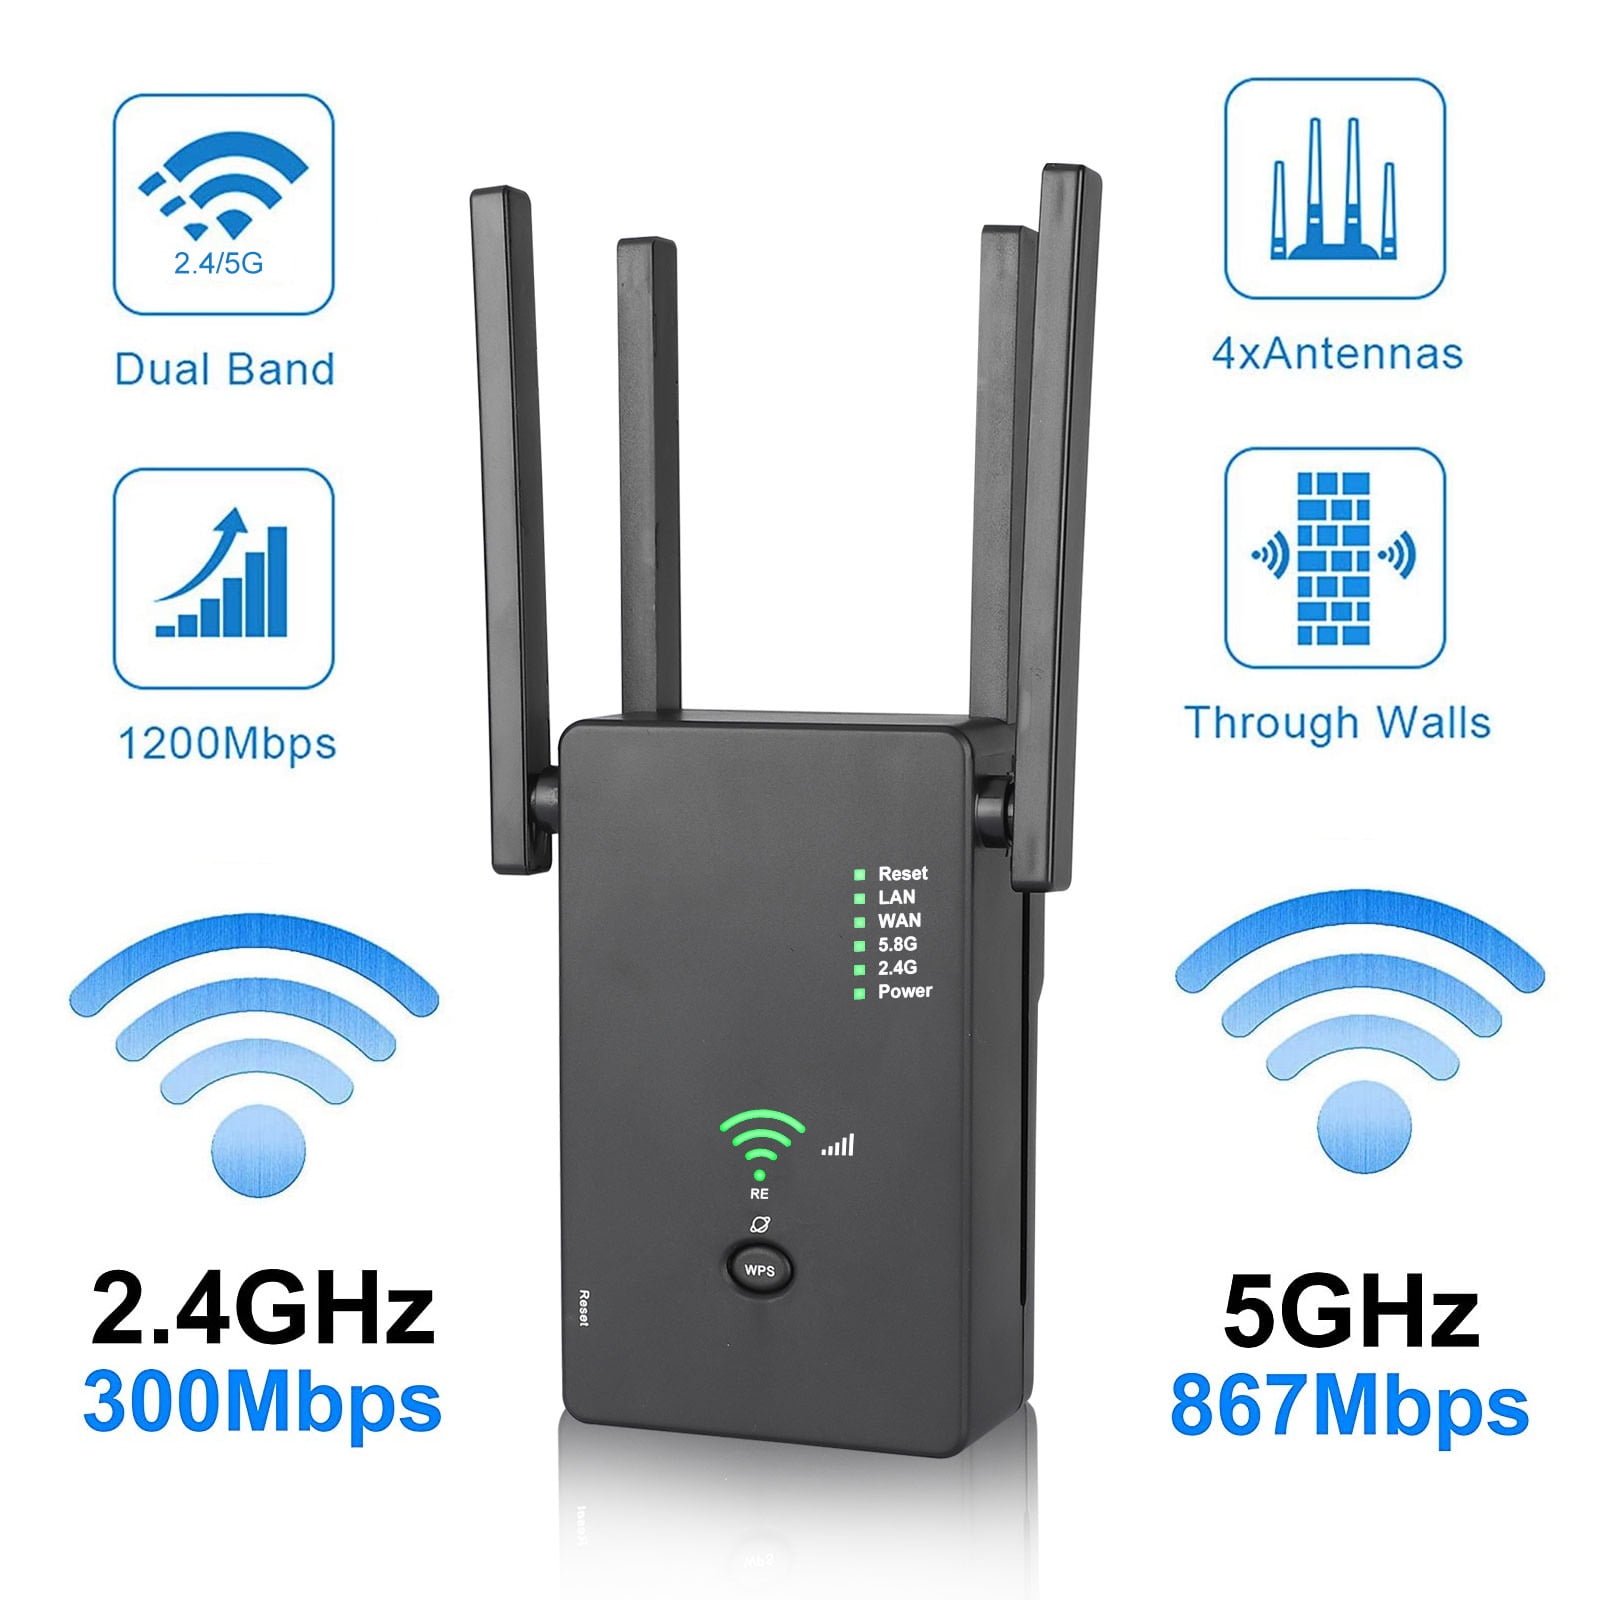 【Newest 2020】 Wireless WiFi Router High Speed Gaming Router Up to AC1200Mbps with Dual Band 2.4GHz and 5GHz Ideal for Home Office & HD Video Streaming Works Great with Any Devices 